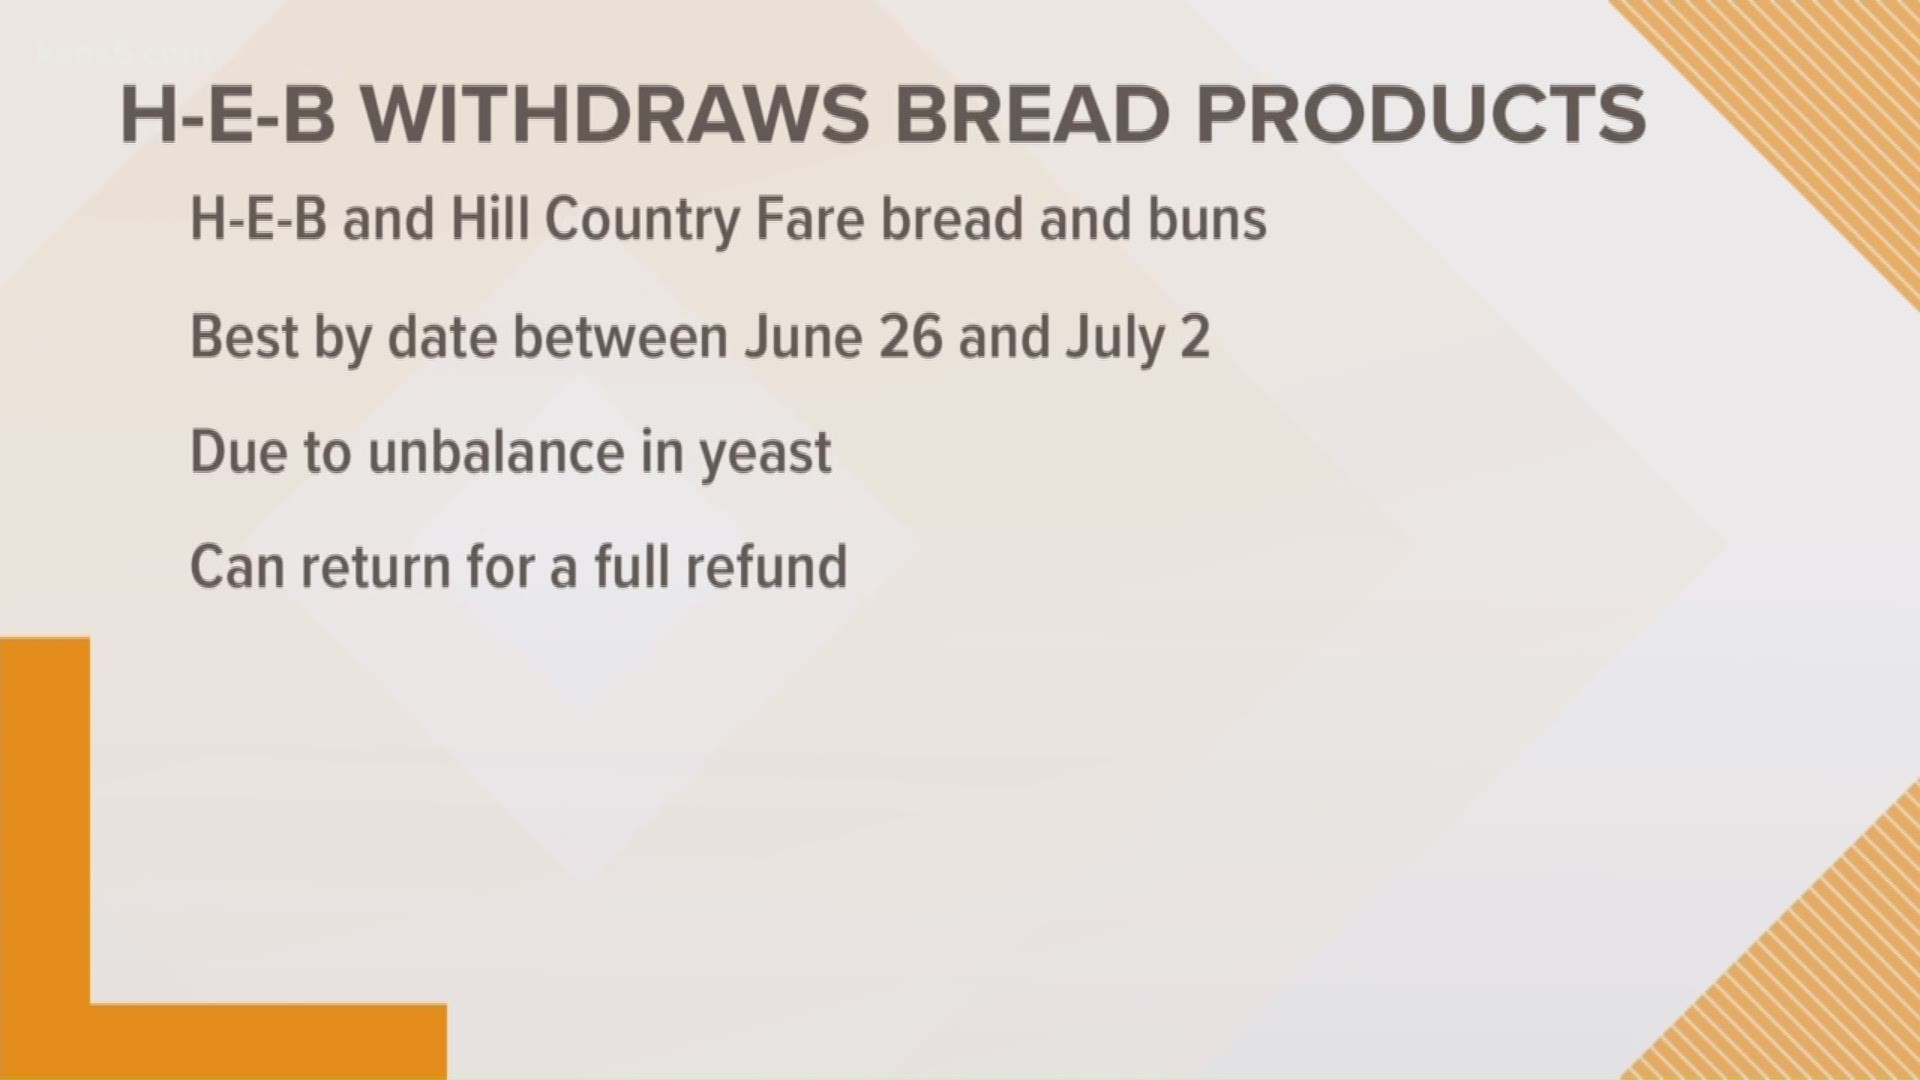 The recall goes for all HEB and Hill Country Fare bread and bunds.